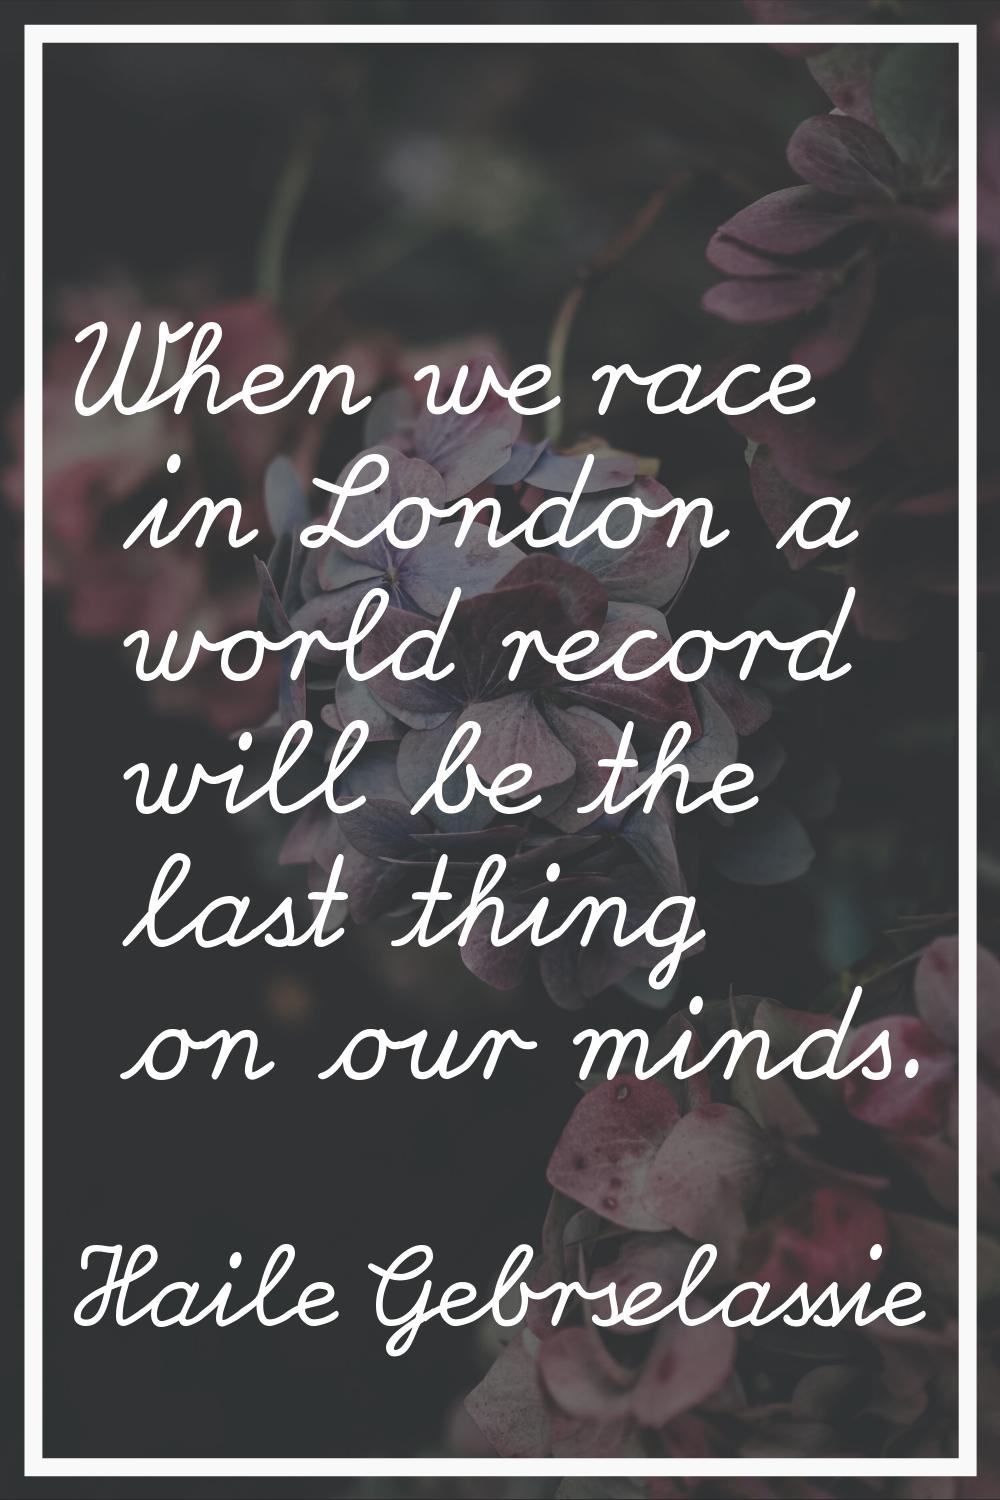 When we race in London a world record will be the last thing on our minds.